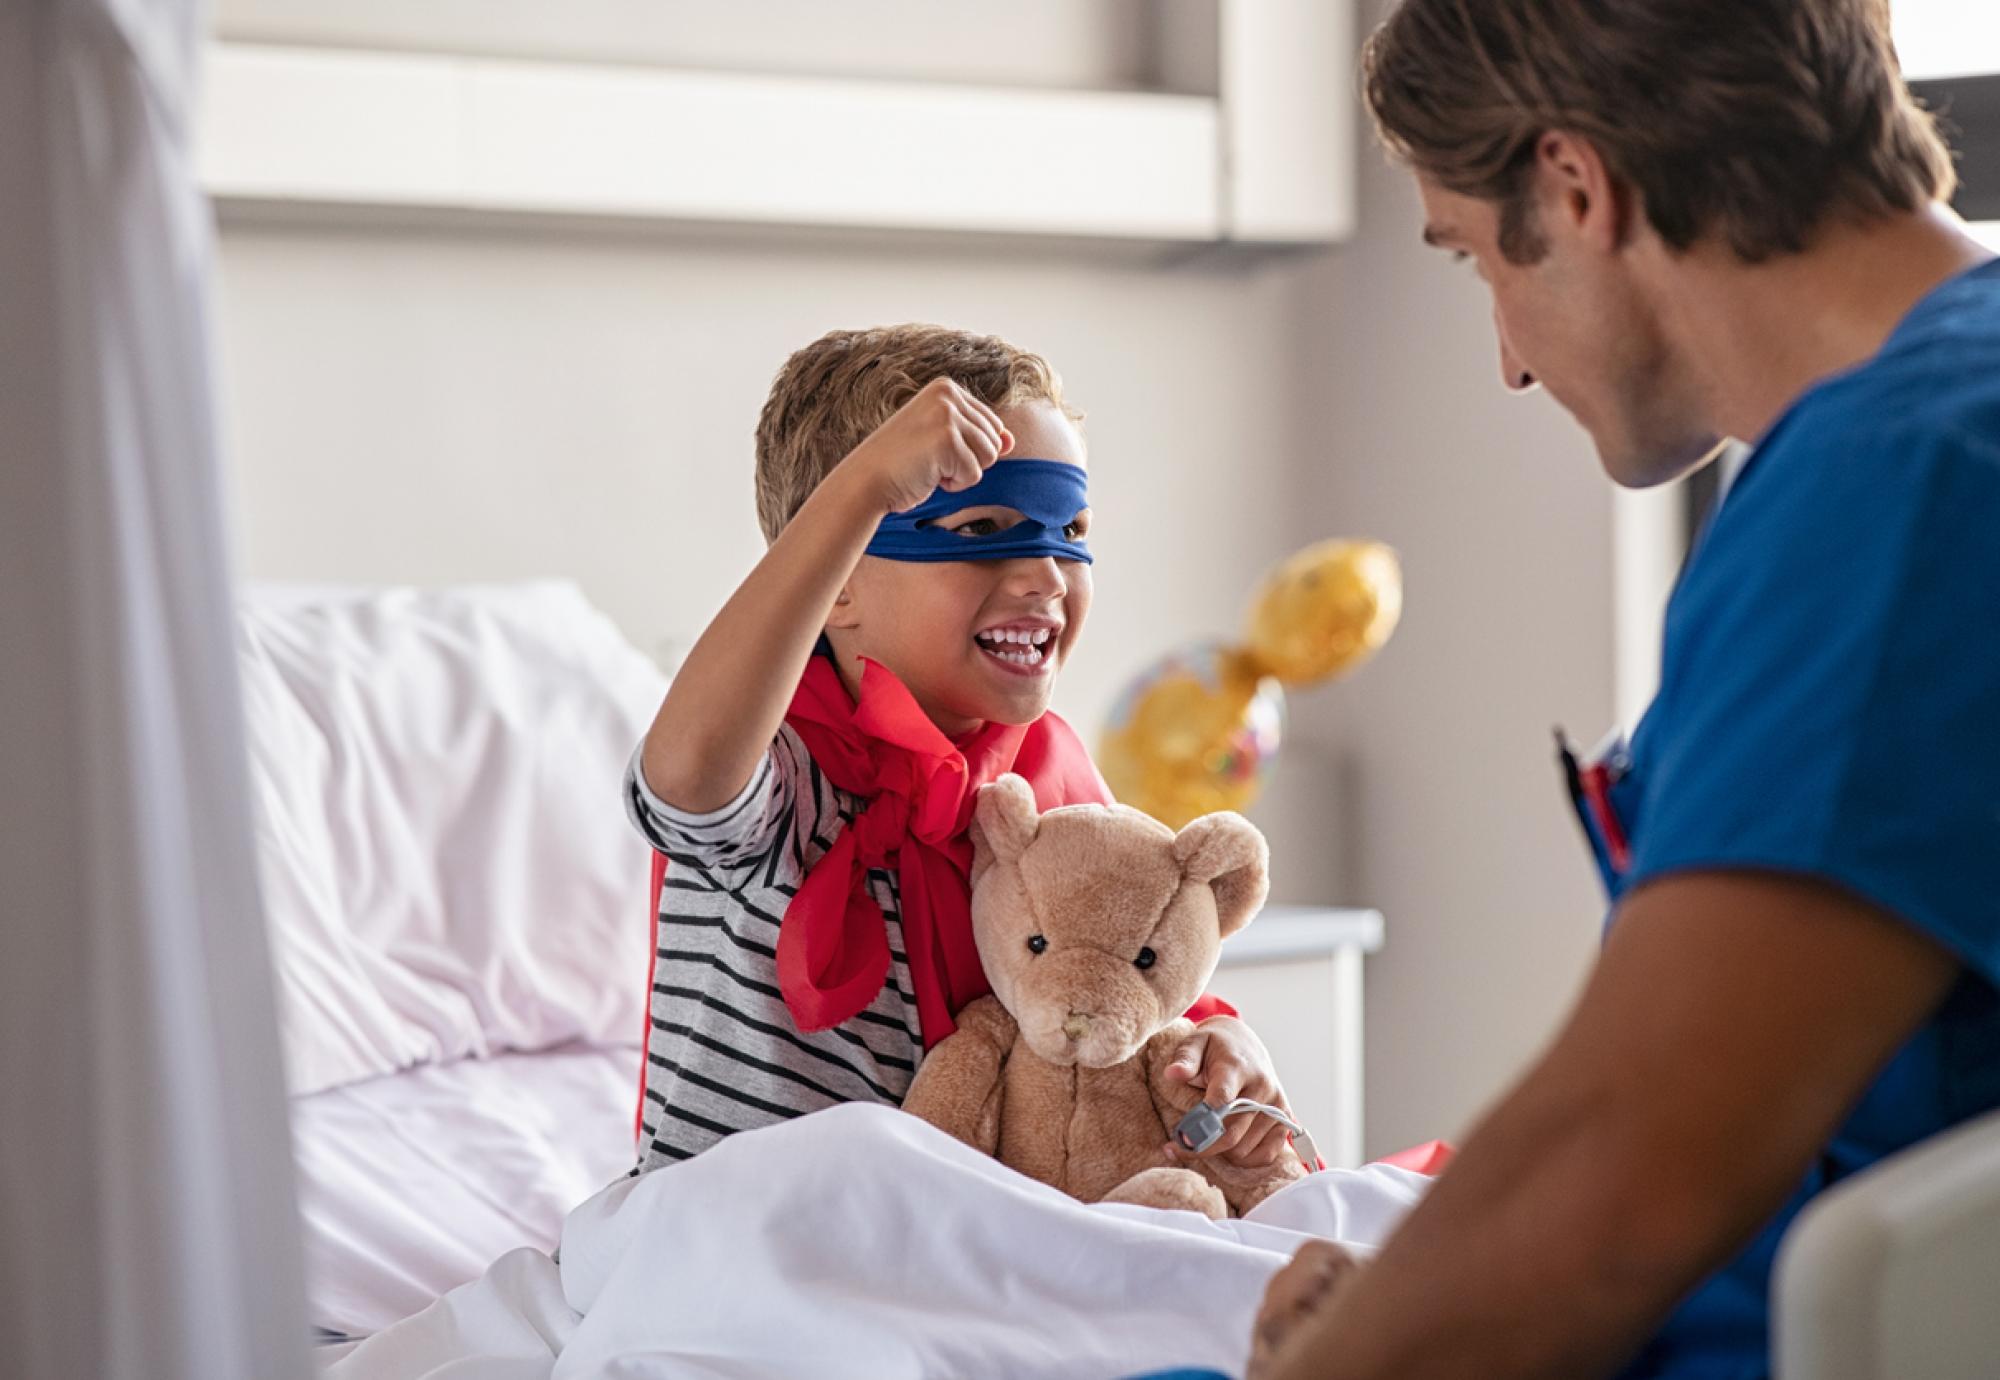 Child dressed as a superhero in hospital